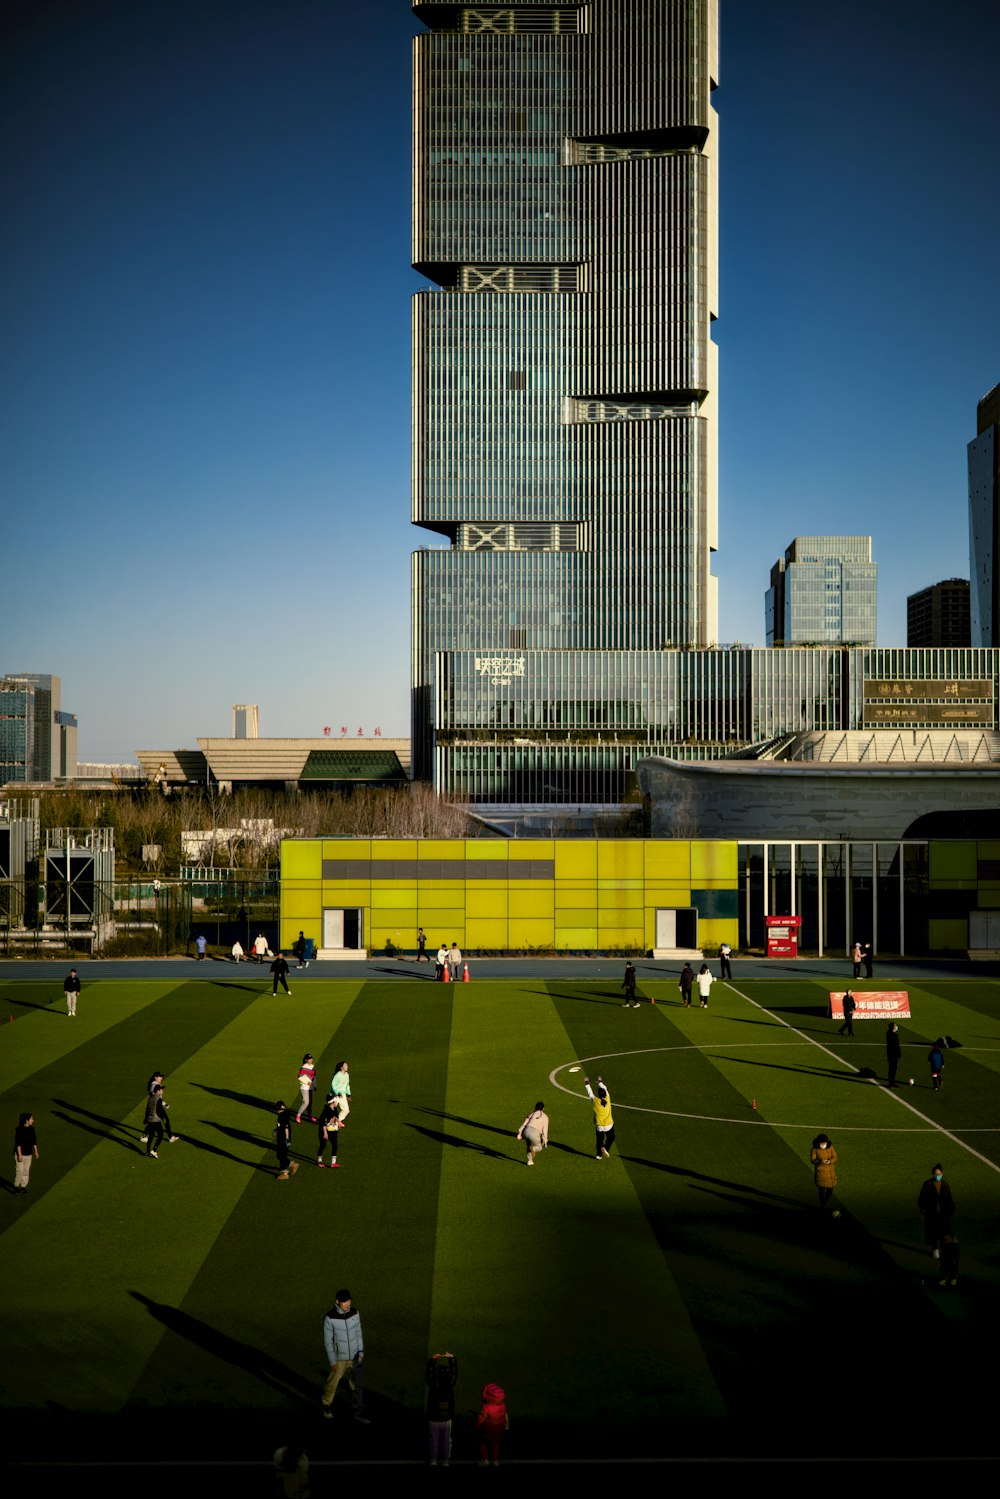 a soccer field in front of a tall building